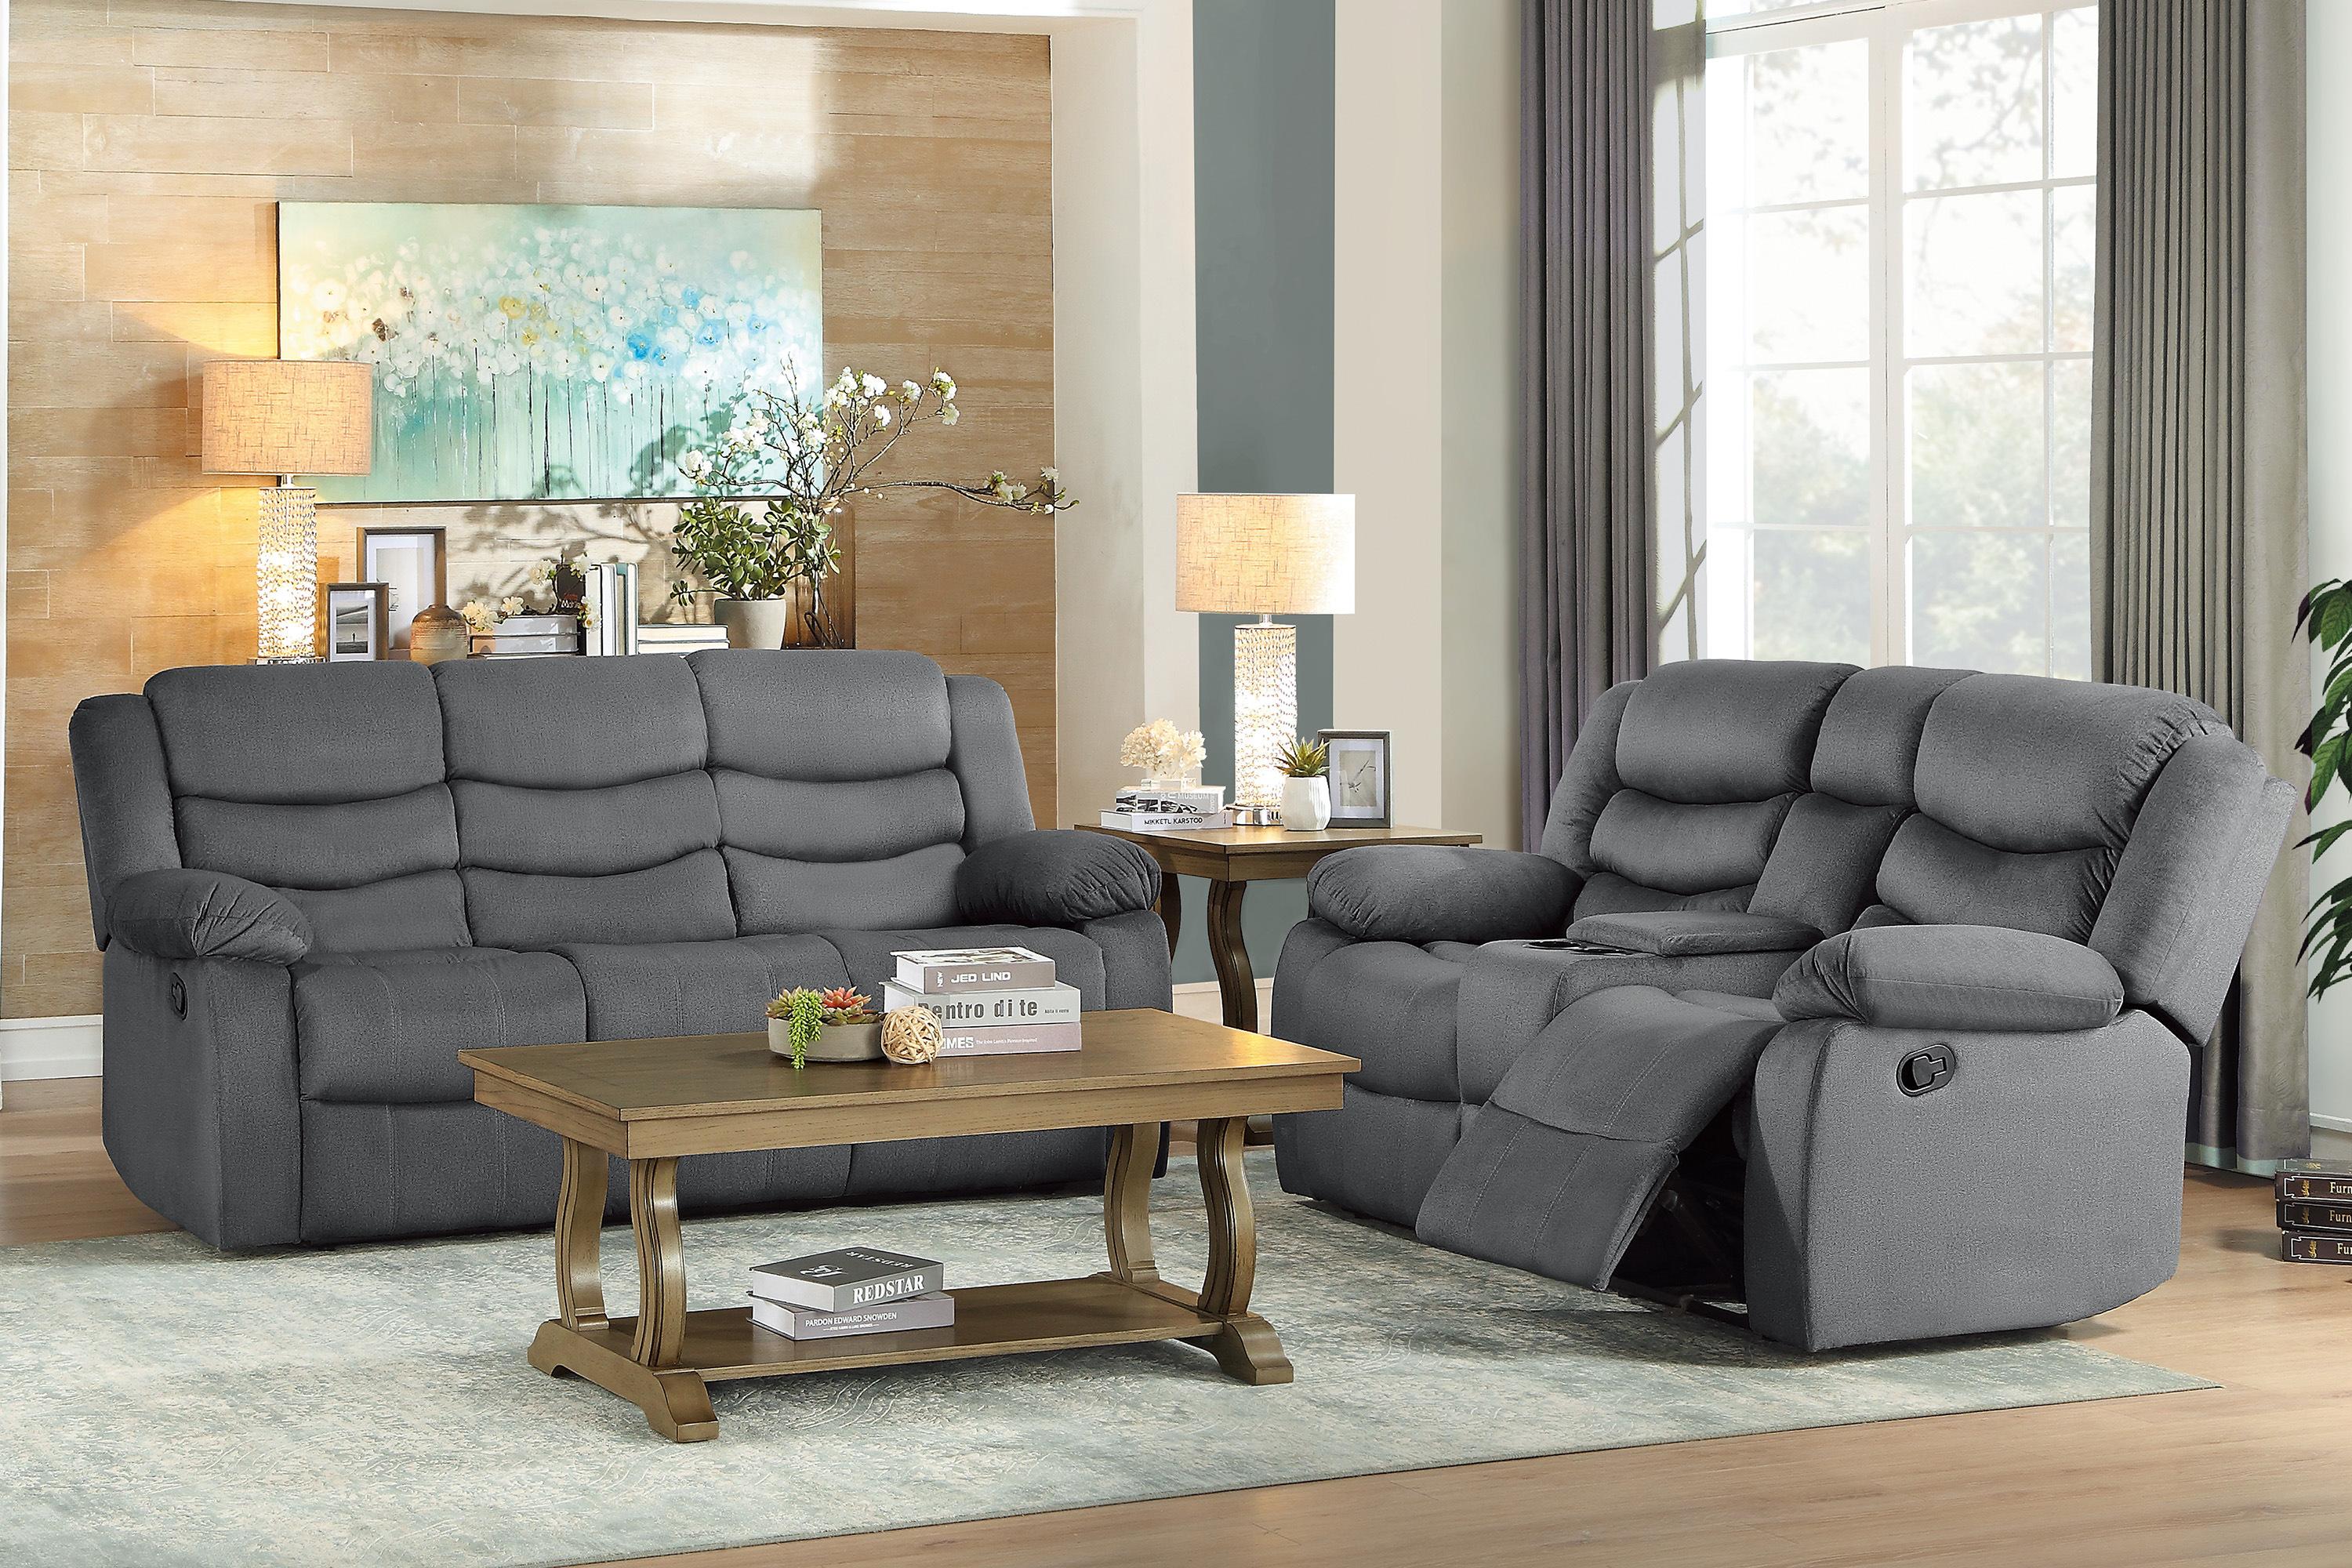 

                    
Homelegance 9526GY-3 Discus Reclining Sofa Gray Microfiber Purchase 
